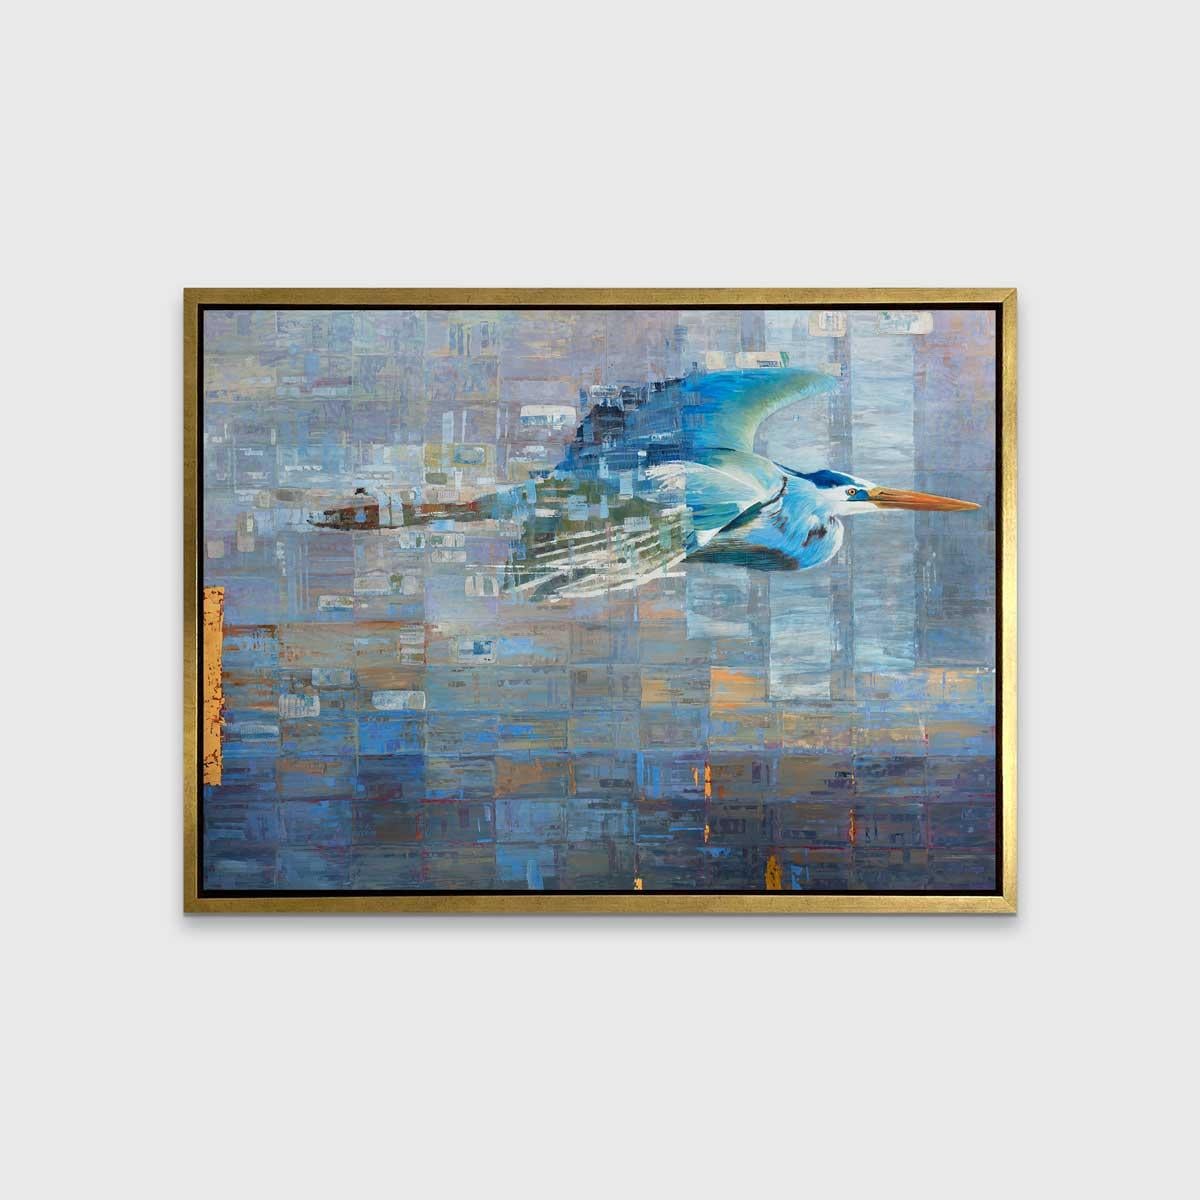 This abstract limited edition print features a blue heron bird in flight (facing left). The background is an abstract rectangular pattern with blue and gold rectangles, which blend into the foreground on the heron's wings, and unifying the